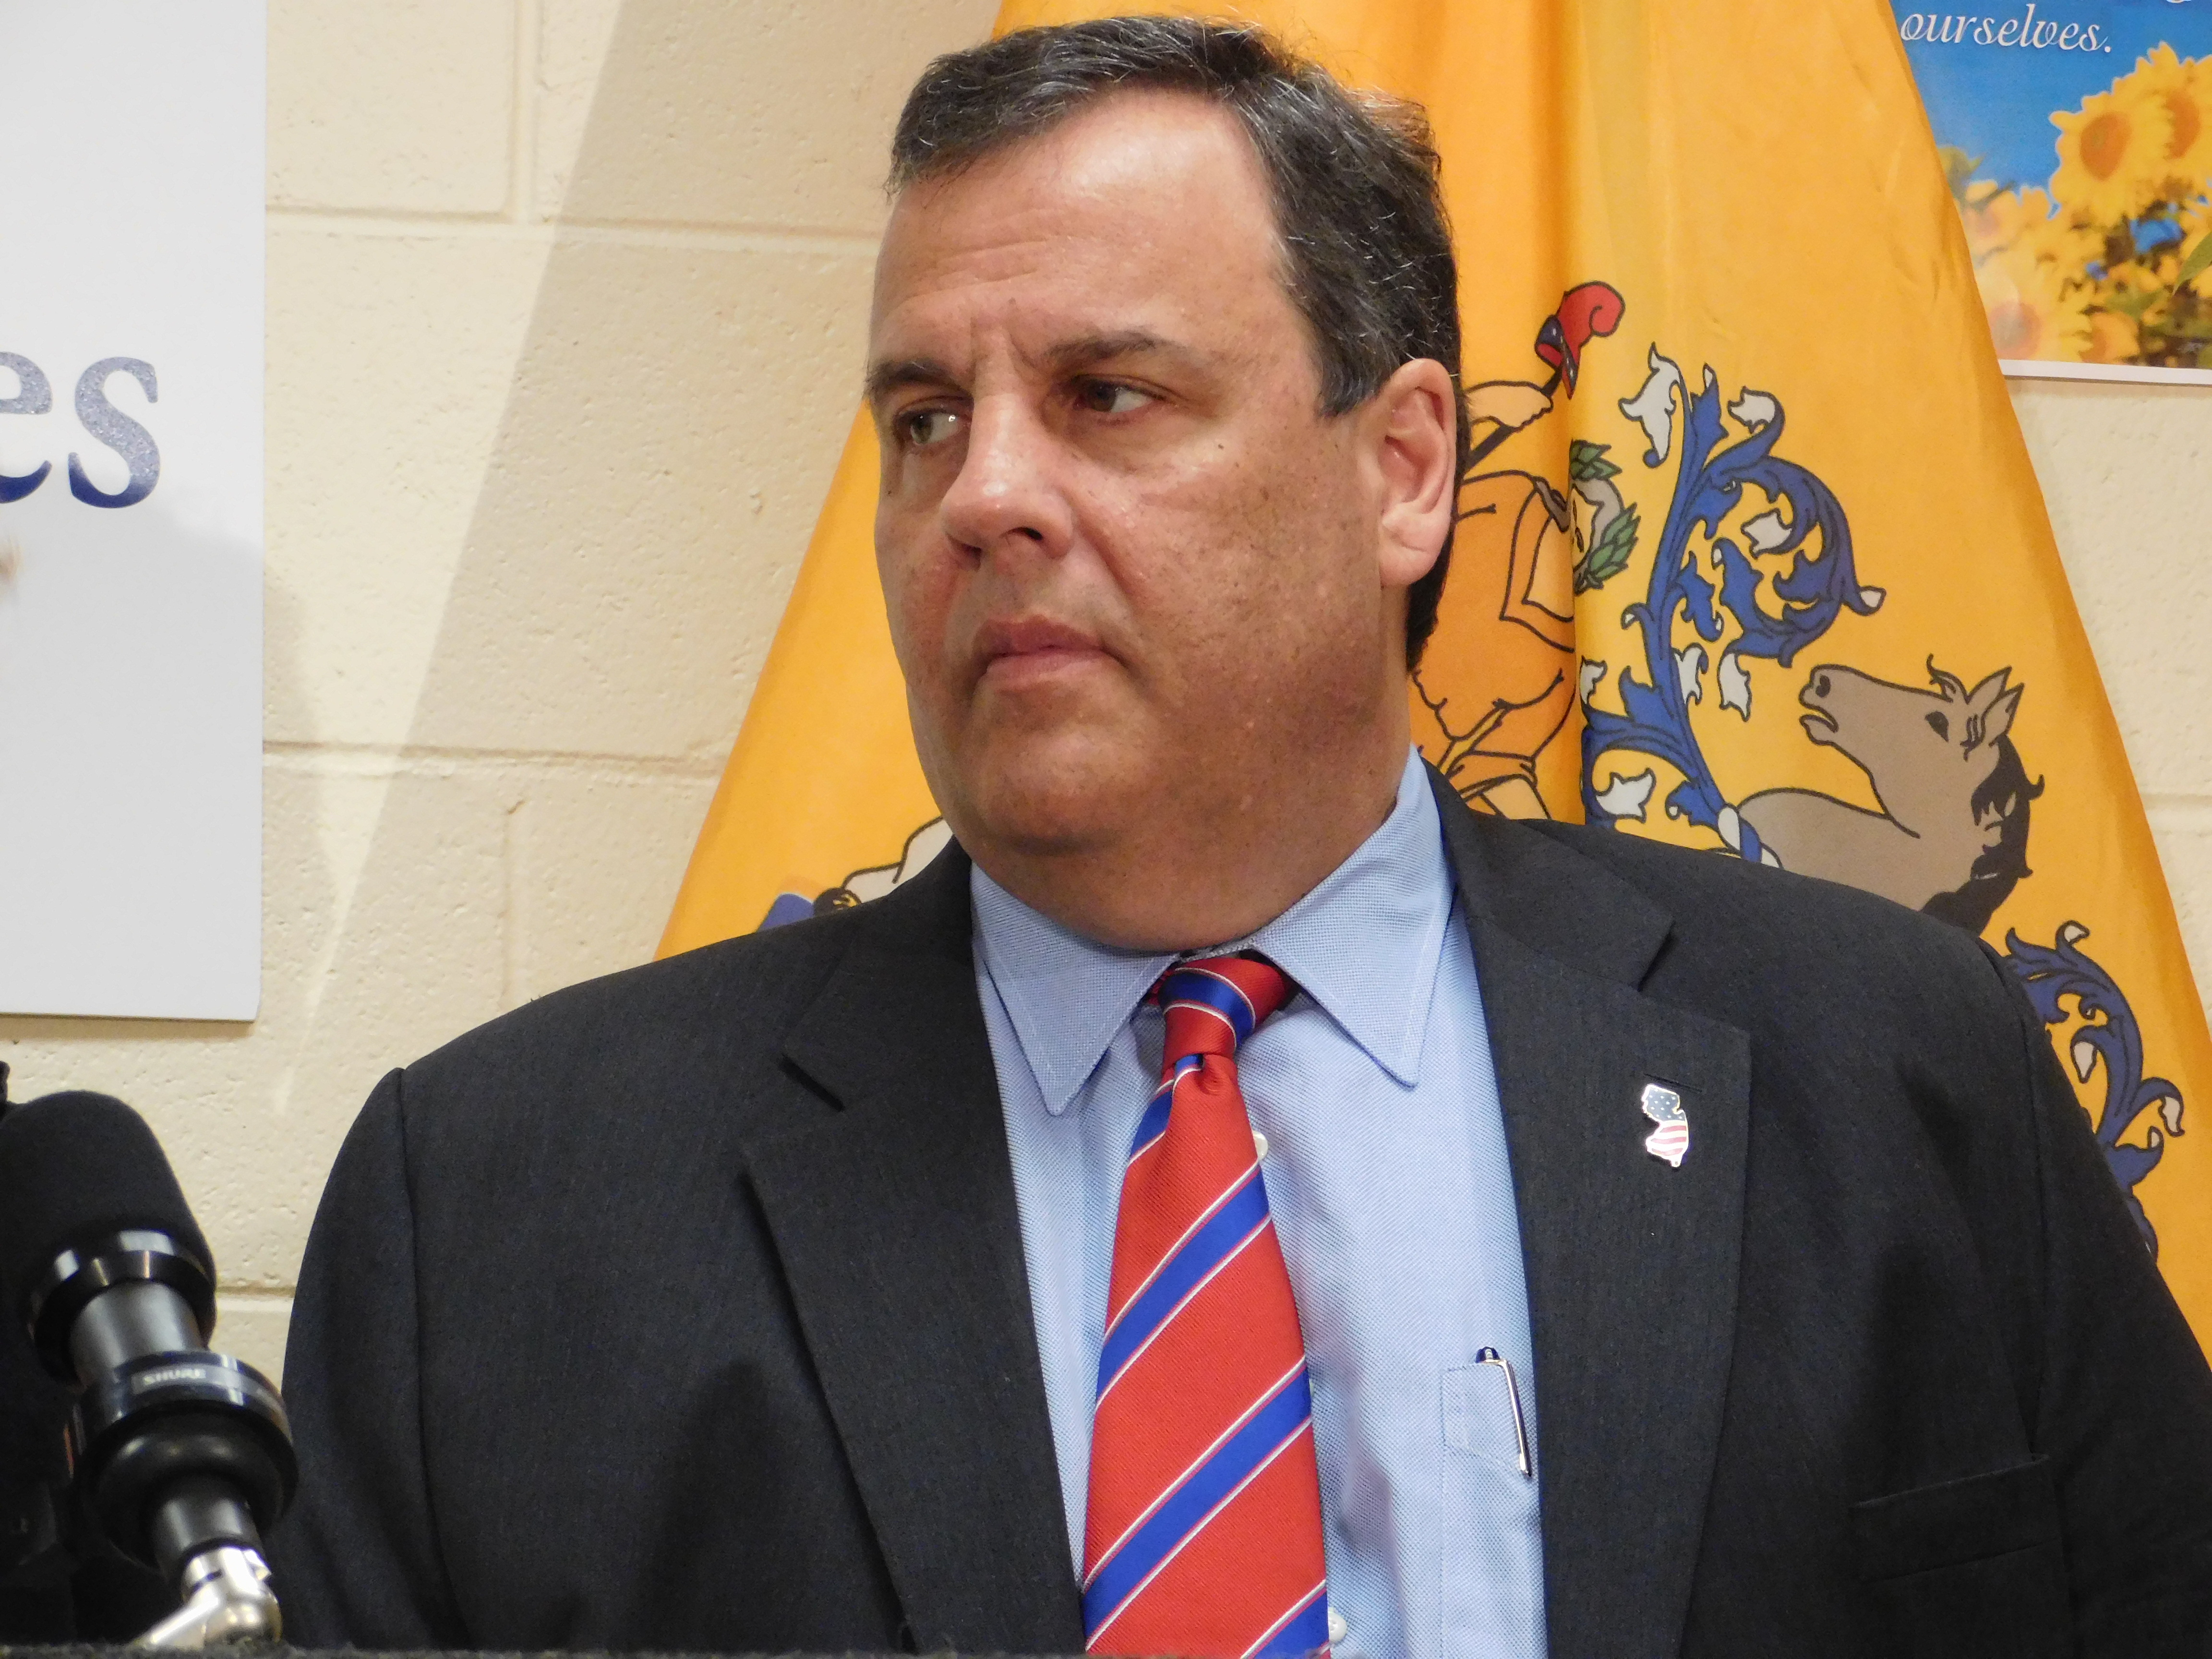 With both sides in the trial of two former allies determined to prove he had a role in the "Bridgegate" lane closure in Fort Lee, pundits and politicians see a tough road ahead for N.J. Governor Chris Christie.